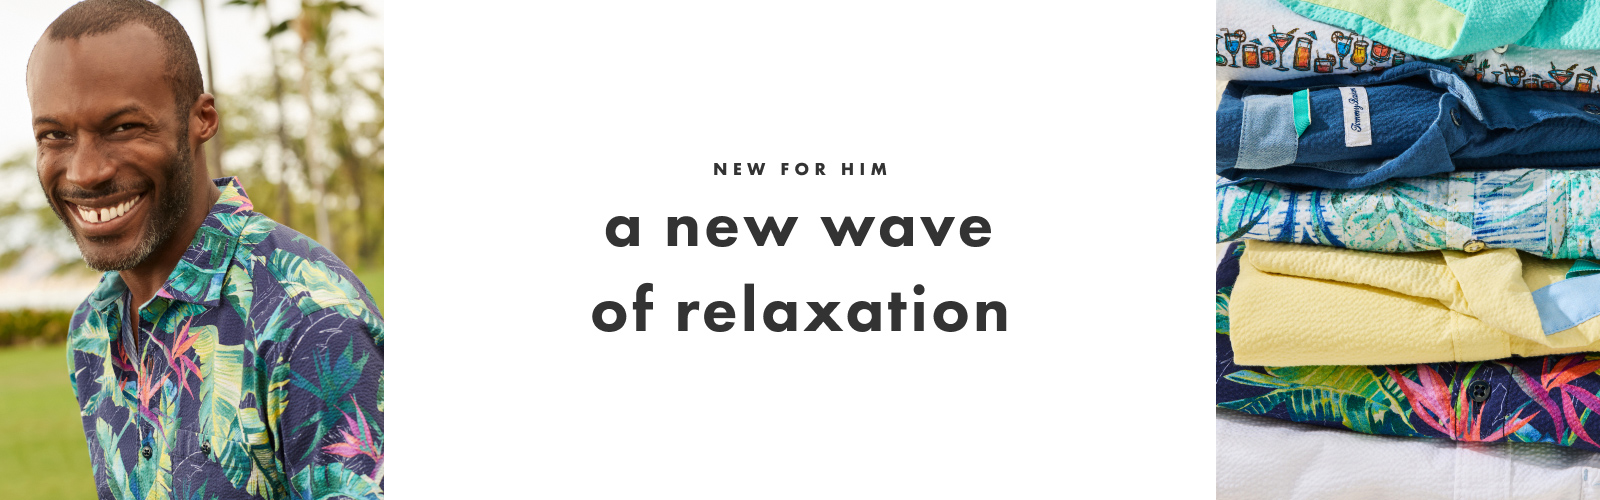 New for him. A new wave of relaxation.